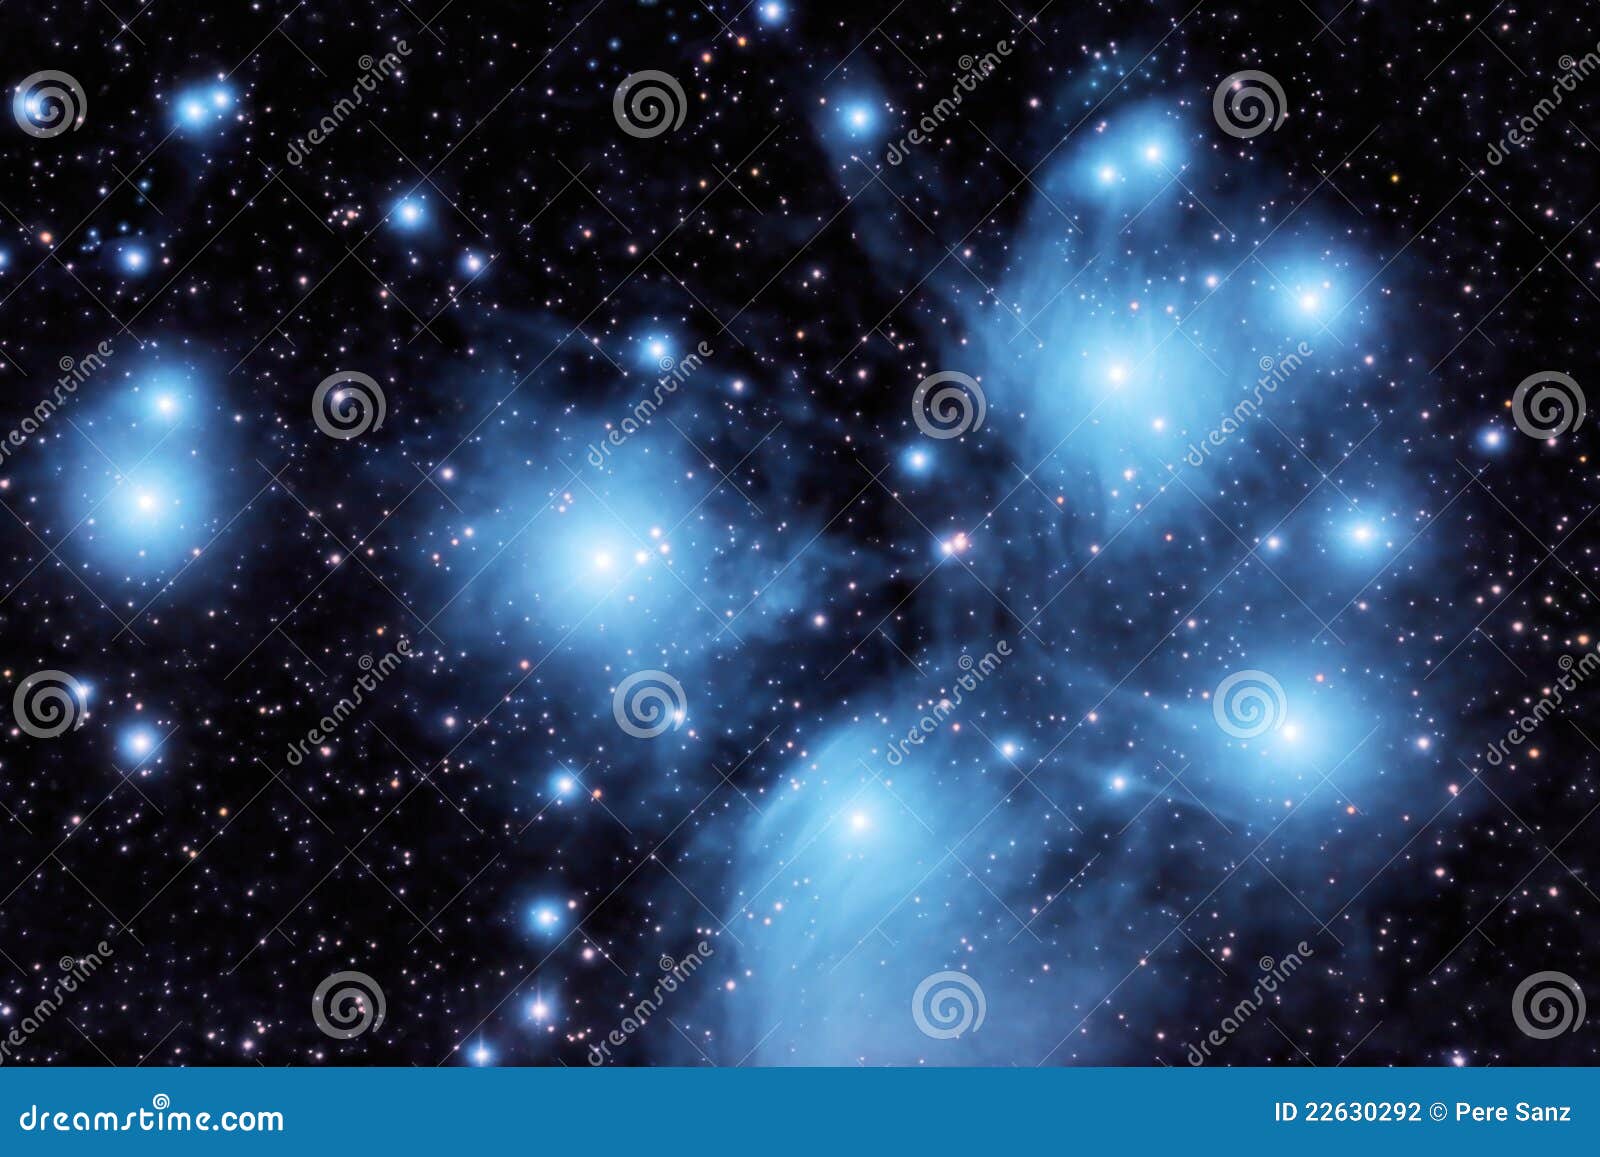 the pleiades open cluster